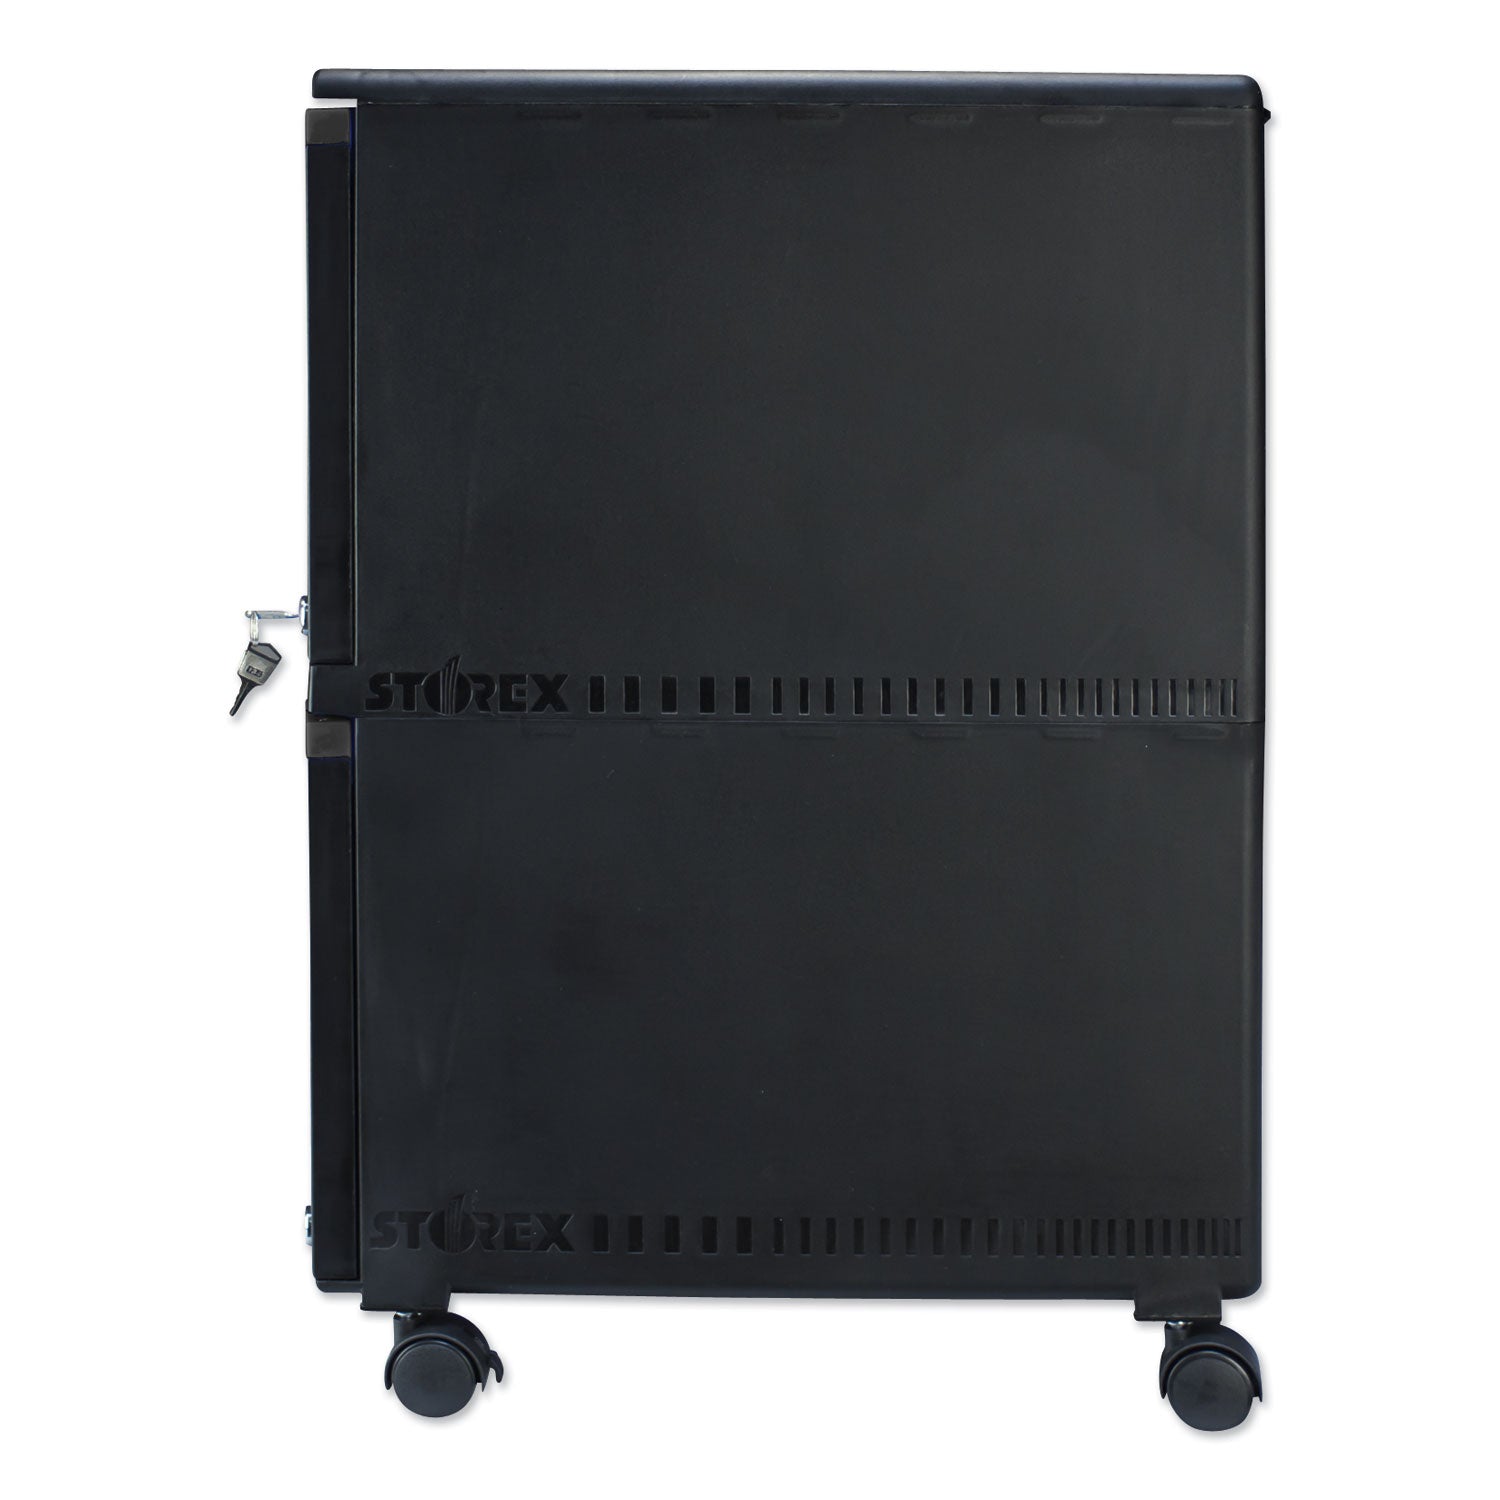 two-drawer-mobile-filing-cabinet-2-legal-letter-size-file-drawers-black-1475-x-1825-x-26_stx61312b01c - 3